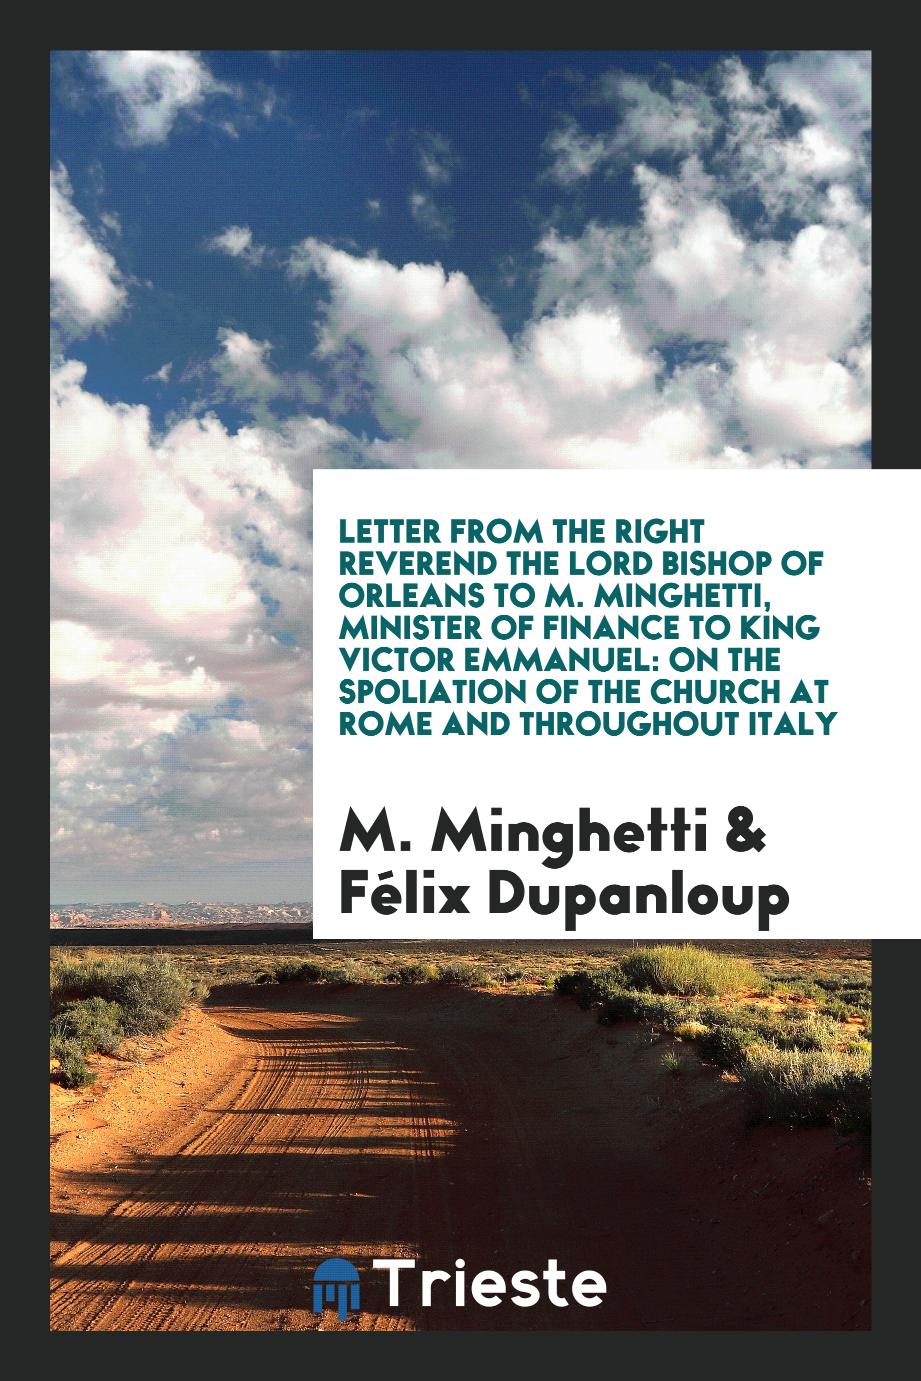 Letter from the right reverend the Lord Bishop of Orleans to M. Minghetti, minister of finance to King Victor Emmanuel: on the spoliation of the Church at Rome and throughout Italy